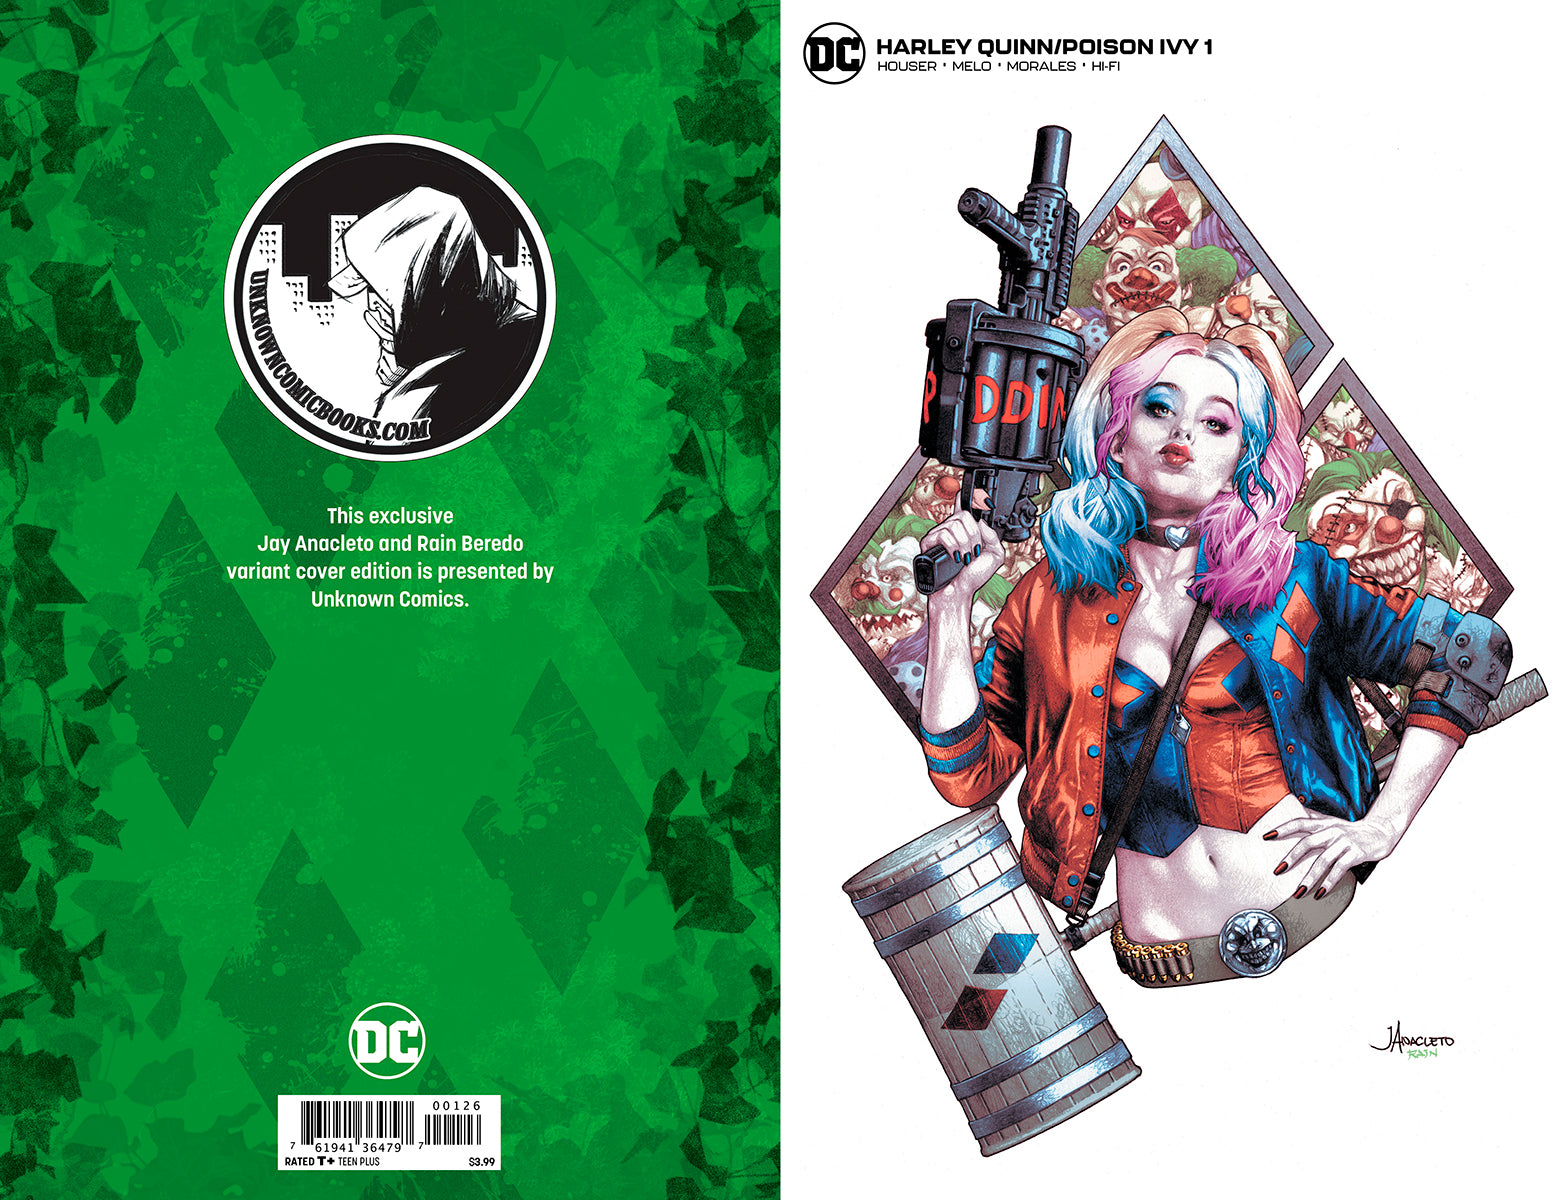 HARLEY QUINN & POISON IVY #1 (OF 6) UNKNOWN COMICS JAY ANACLETO EXCLUSIVE MINIMAL (09/04/2019)